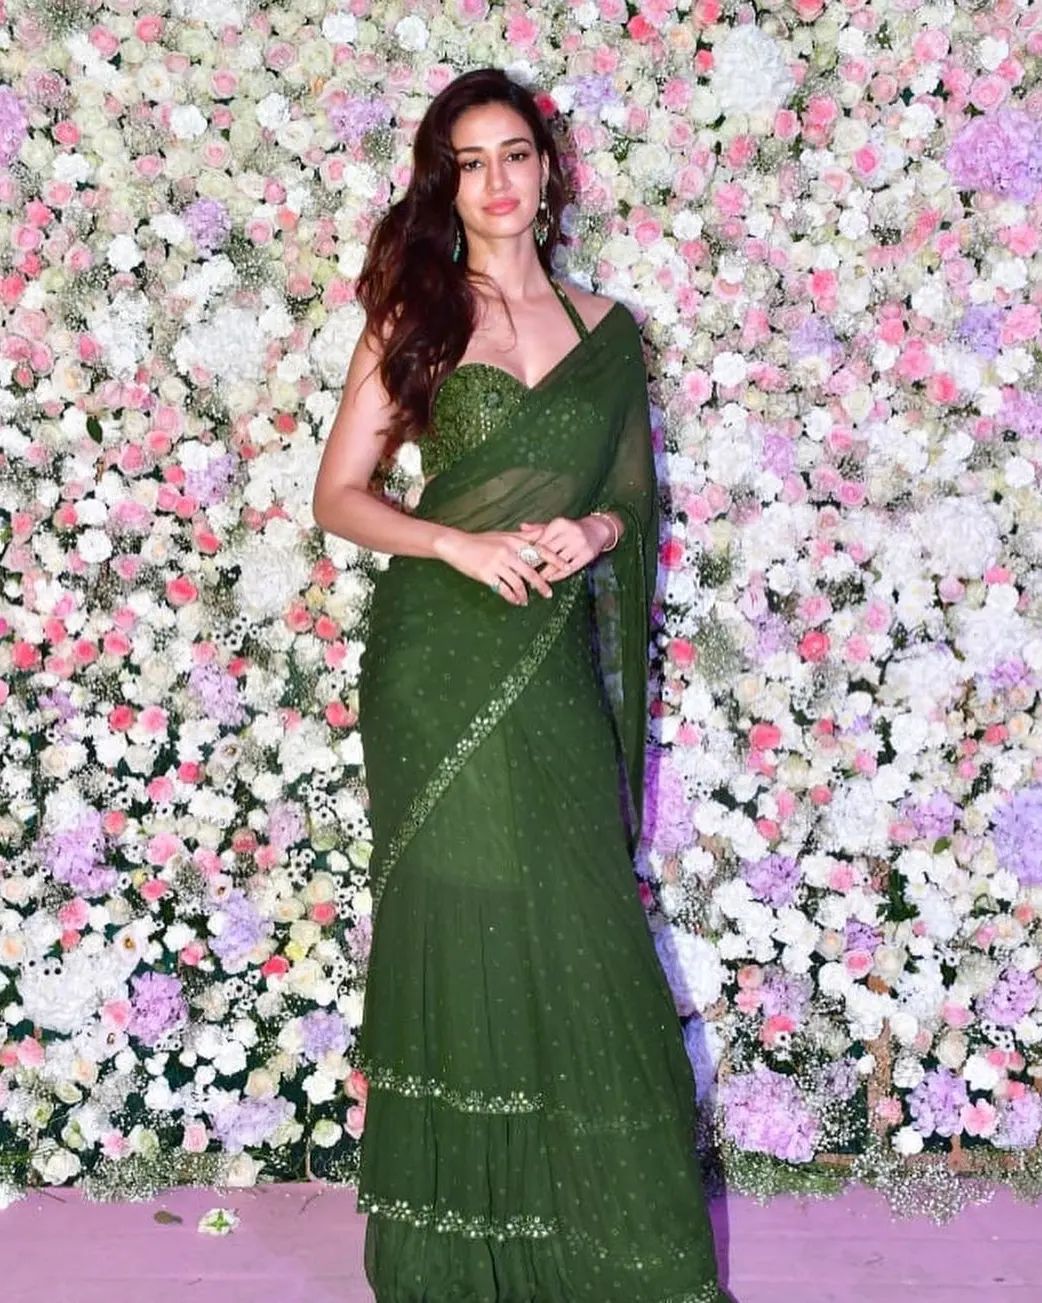 Disha Patani Looks Sexy In A Green Saree Worth Rs. 1.2 Lakh With A Backless Embellished Bralette